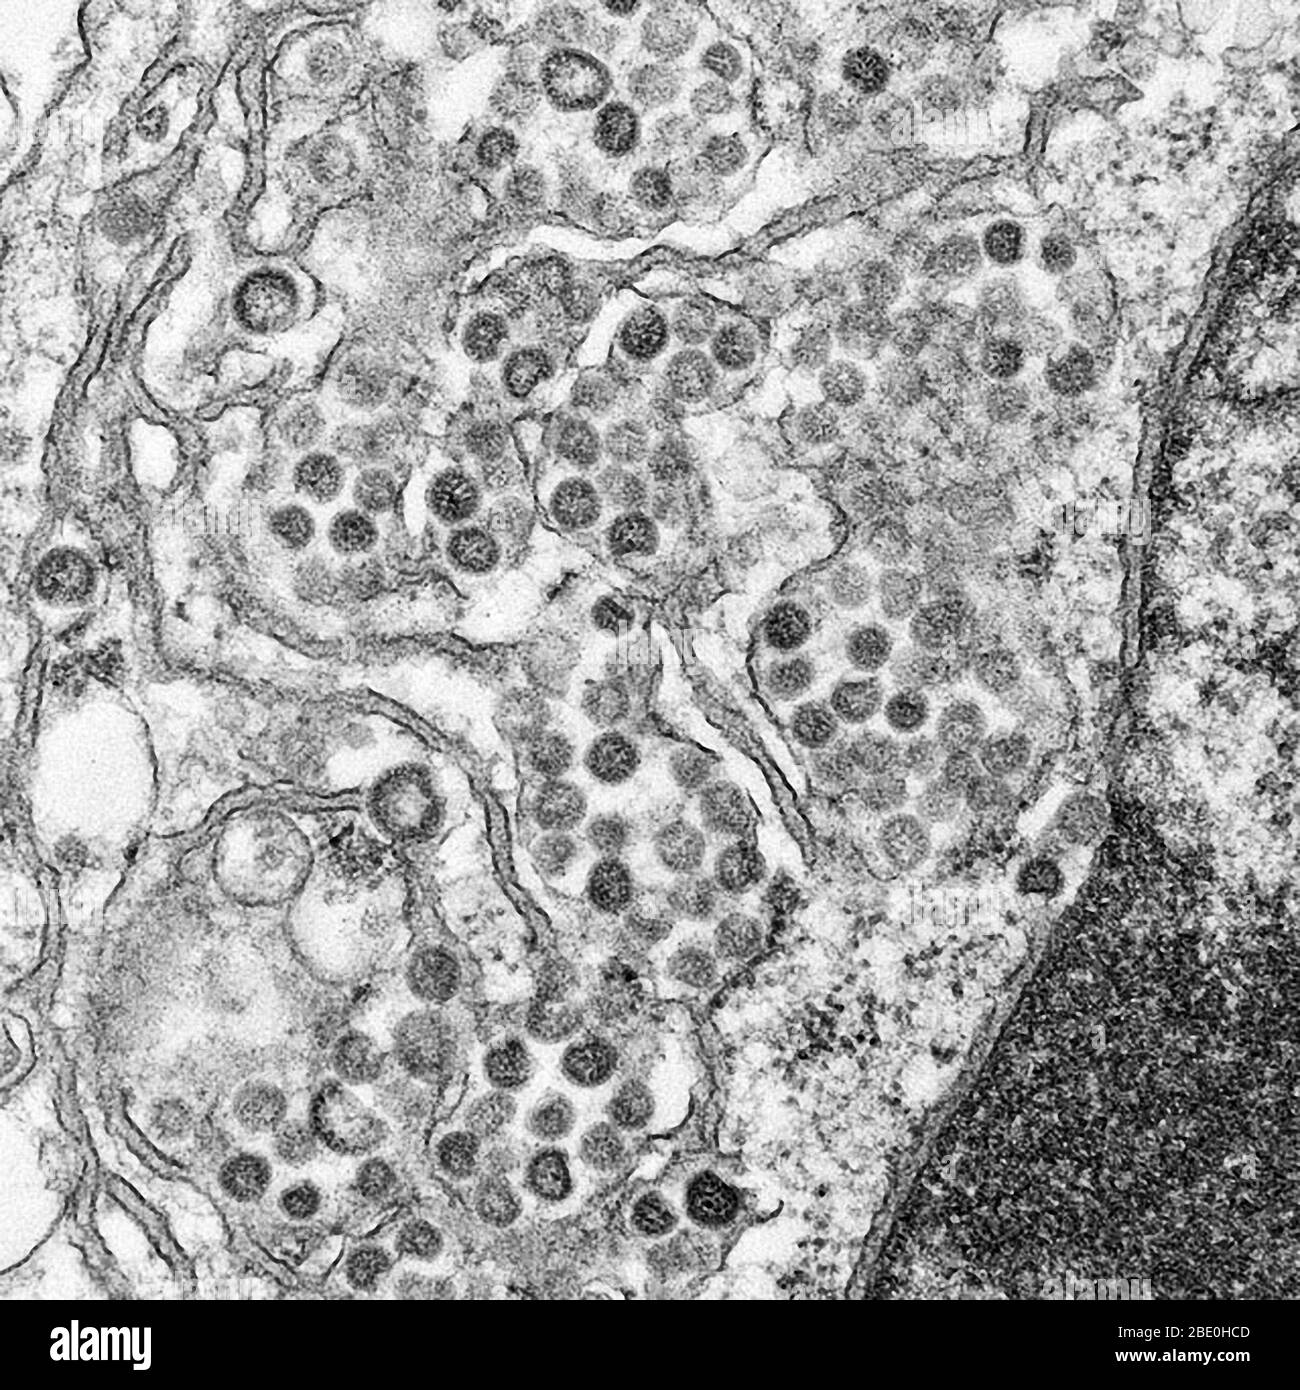 Transmission electron micrograph (TEM) of a thin section of MERS-CoV, showing the spherical particles and cross-sections through the viral nucleocapsid. Middle East respiratory syndrome coronavirus (MERS-CoV) is a novel coronavirus (nCoV) first reported on 24 September 2012 by Egyptian virologist Dr. Ali Mohamed Zaki in Jeddah, Saudi Arabia. He isolated and identified a previously unknown coronavirus from the lungs of a 60-year-old male patient with acute pneumonia and acute renal failure. MERS-CoV is the sixth new type of coronavirus like SARS (but still distinct from it and from the common-c Stock Photo